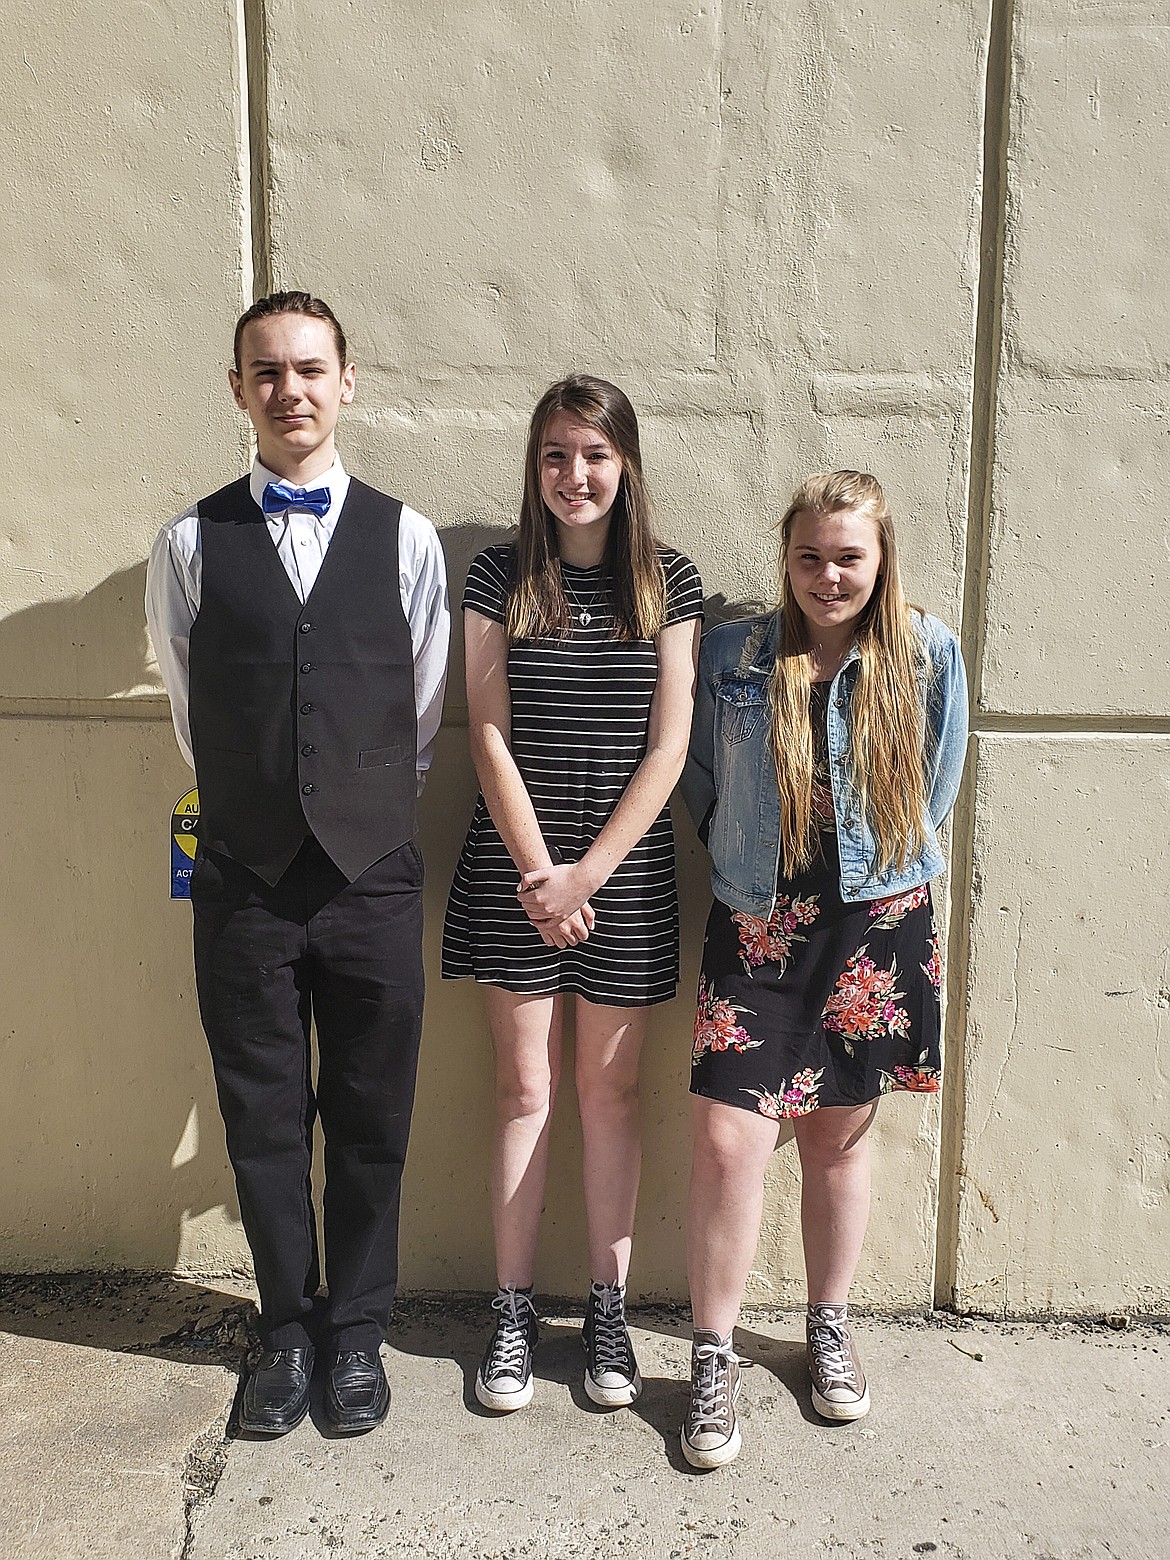 Damien Simanovicki, Alyssa Kelso and Lyndan Clay competed at the State Music Festival for Troy on May 3 through May 4. (Courtesy photo)